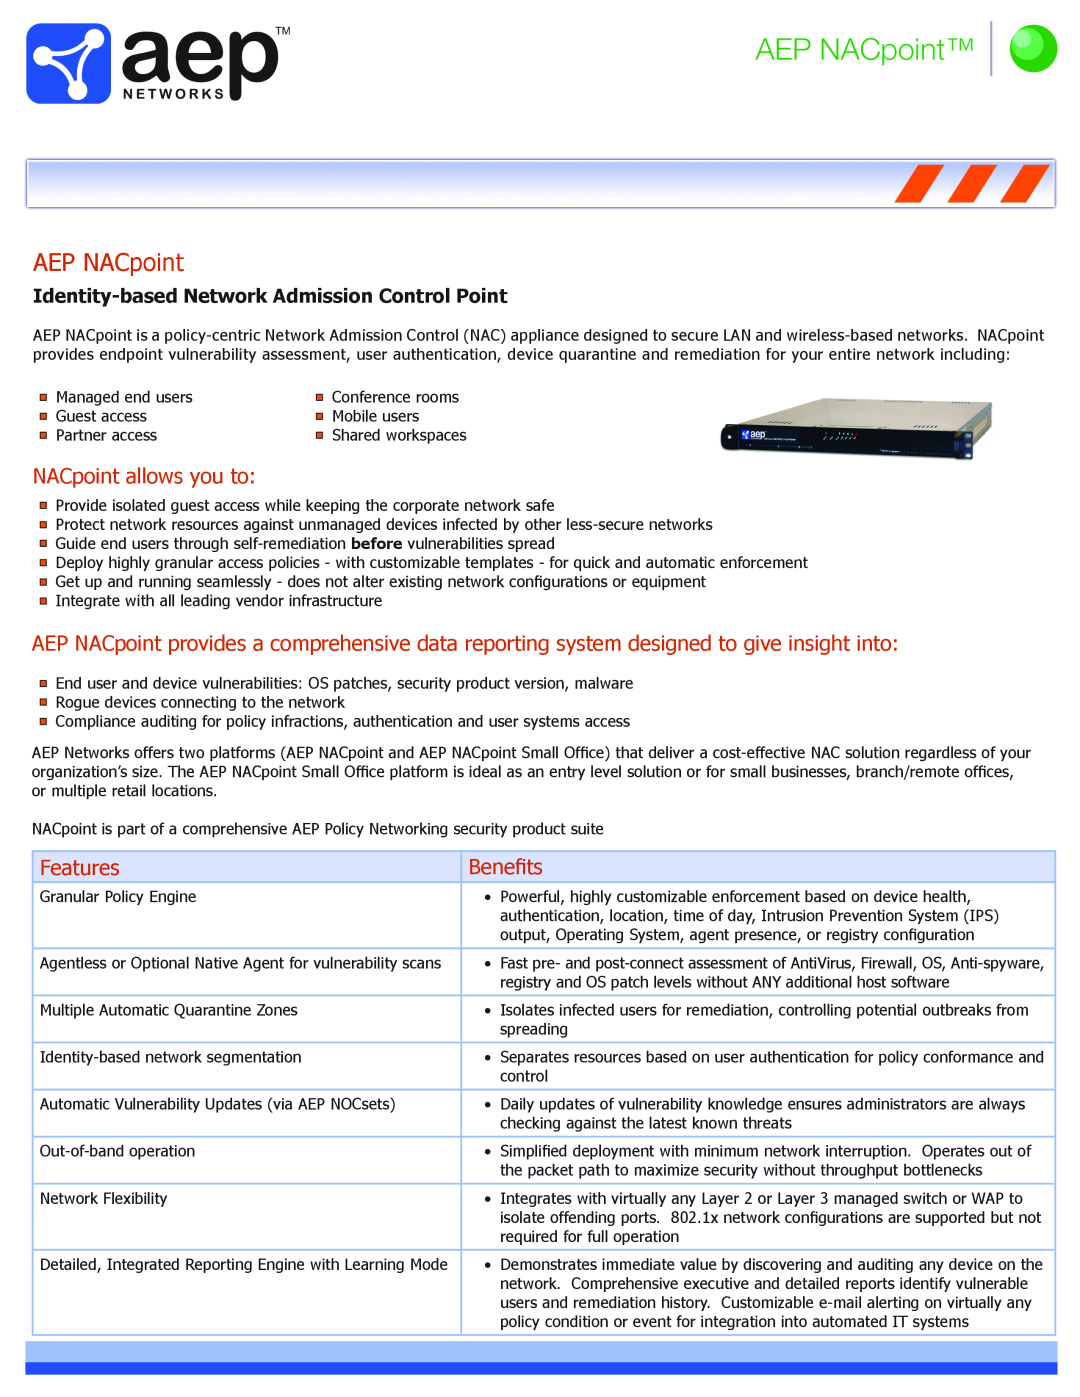 Applied Energy Products manual AEP NACpoint, NACpoint allows you to, Features, Benefits 